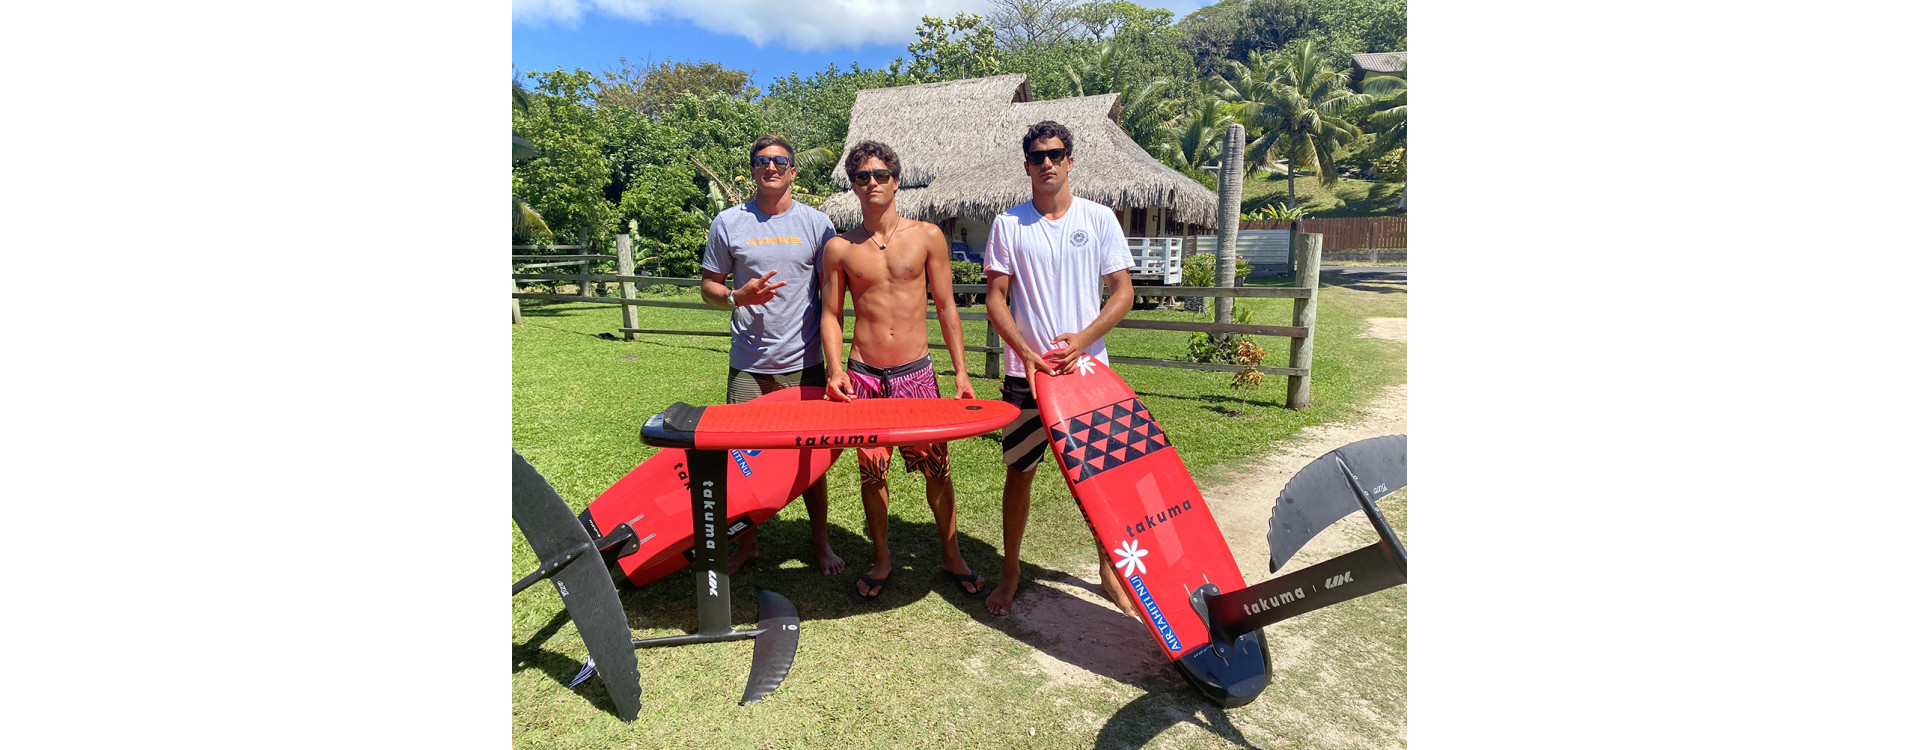 New tahitian riders in the team!